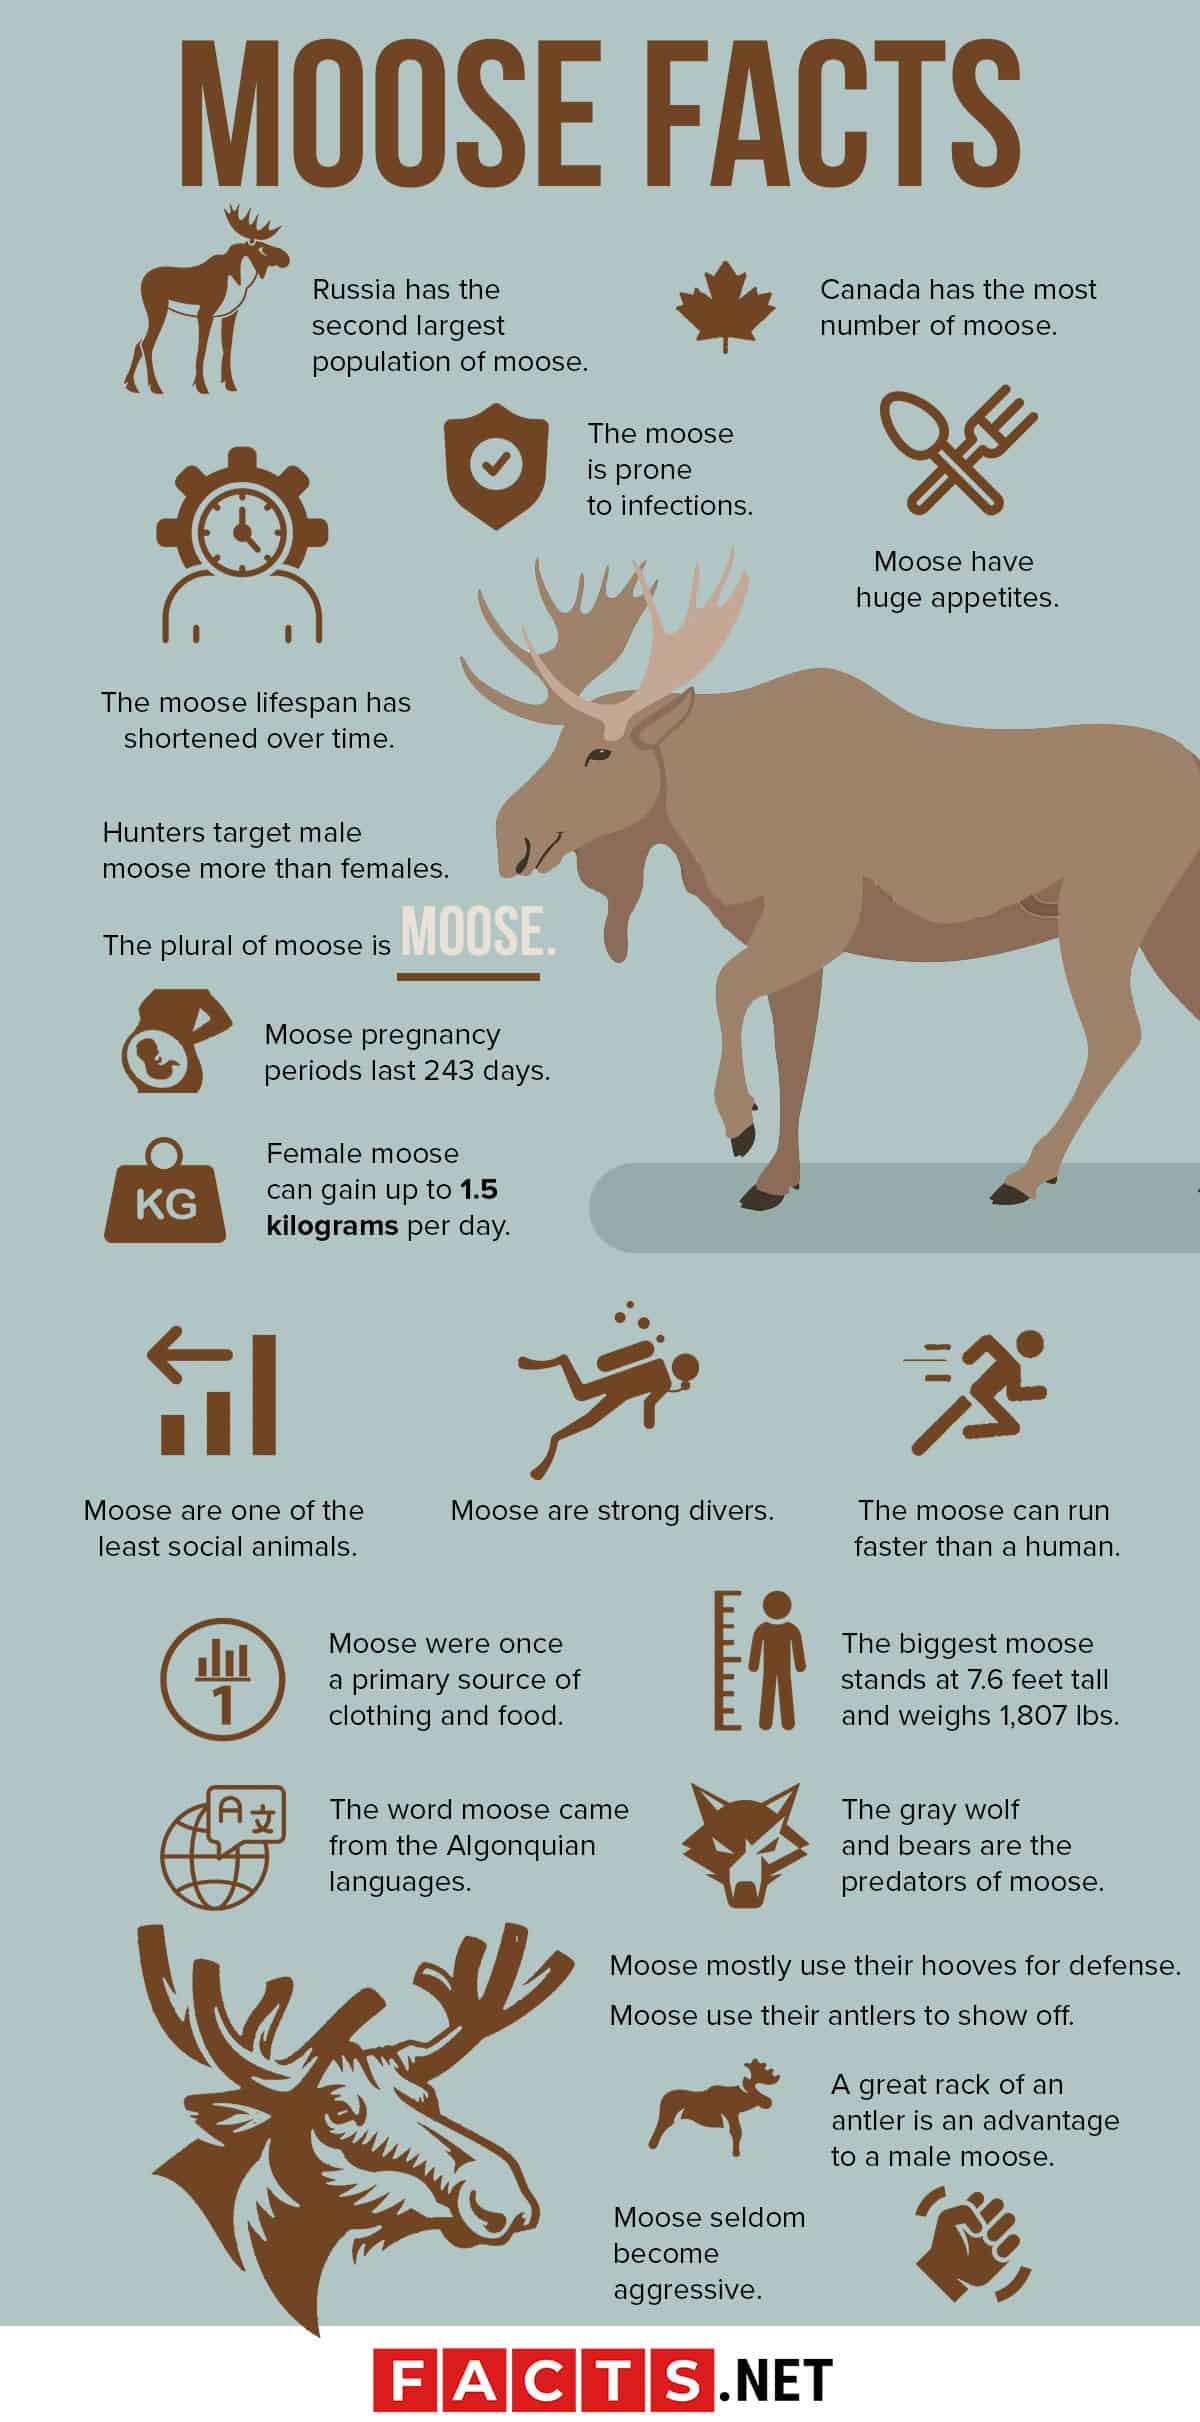 How big is a moose's penis